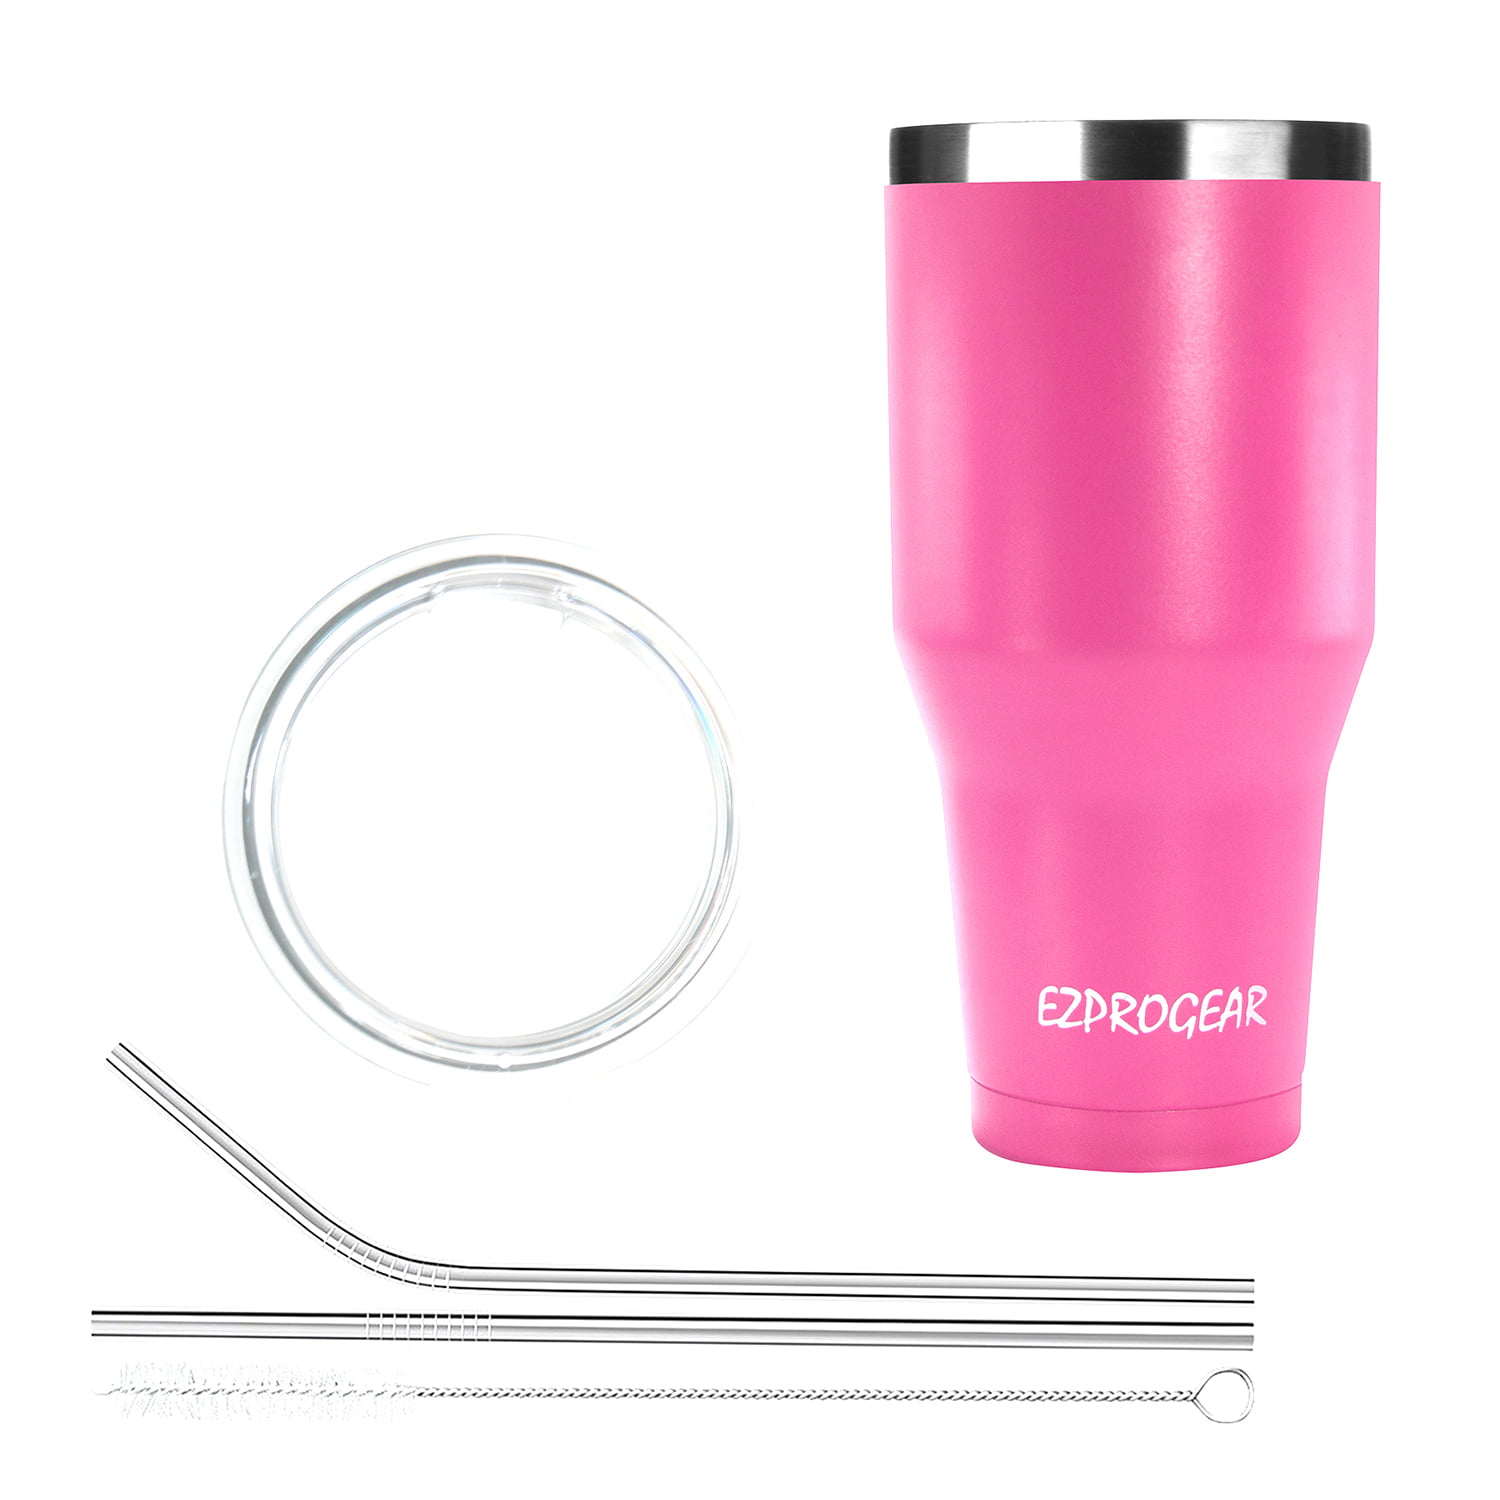 40 oz Tumbler with Handle and Straw, Pink Insulated Travel Mug Iced Coffee  Cup, Reusable Stainless S…See more 40 oz Tumbler with Handle and Straw